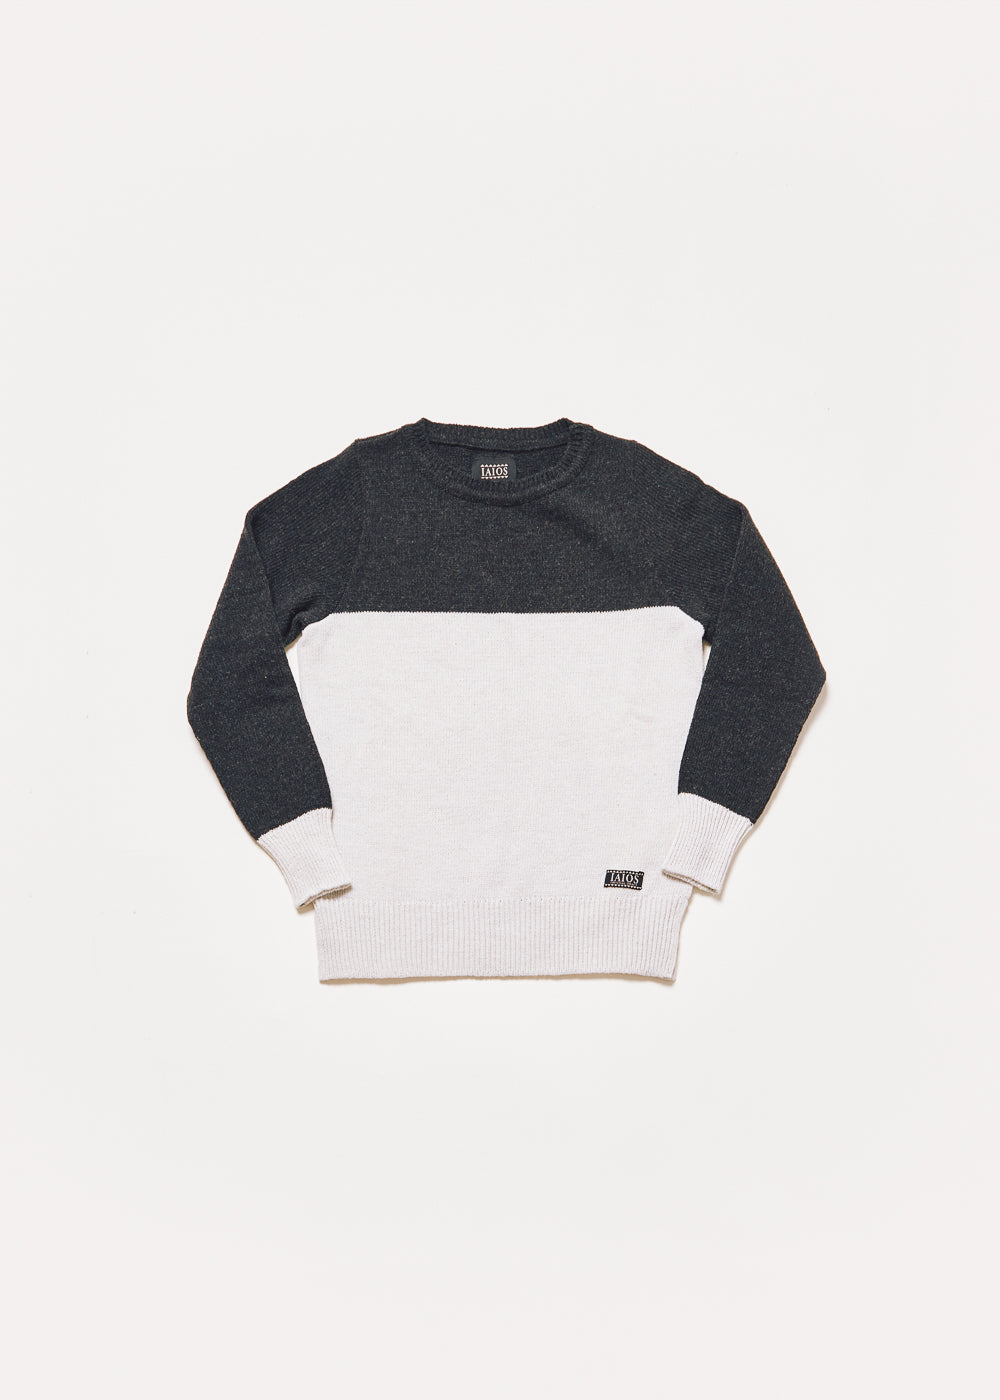 Women's or unisex knitted sweater in which the upper half is black and the lower half is white. 